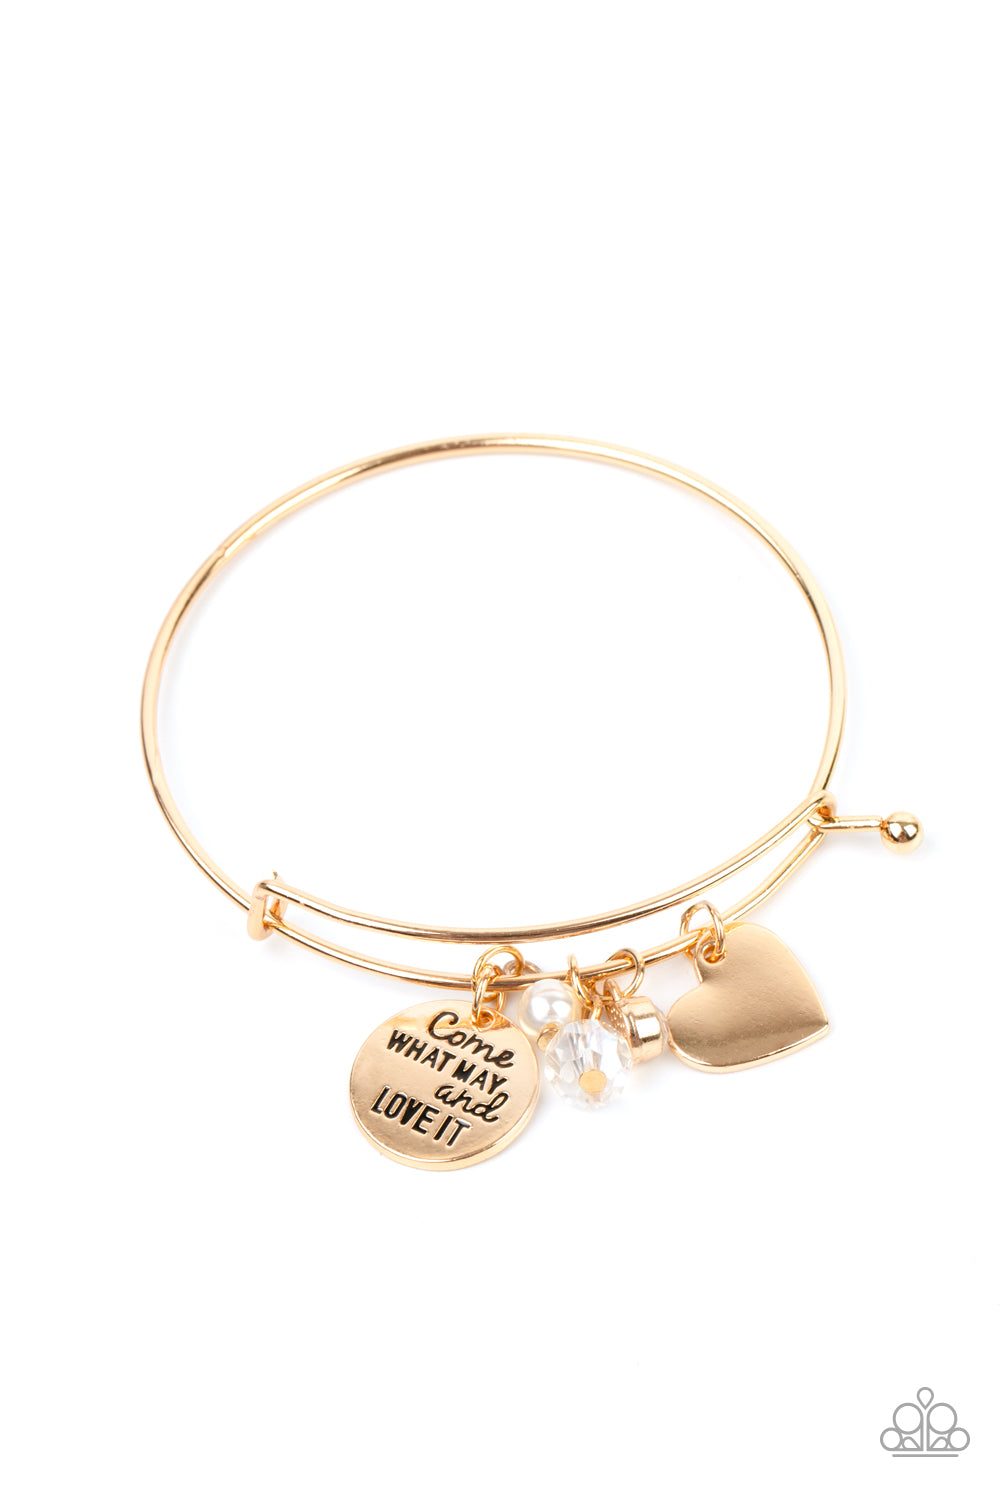 Come What May and Love It - gold - Paparazzi bracelet